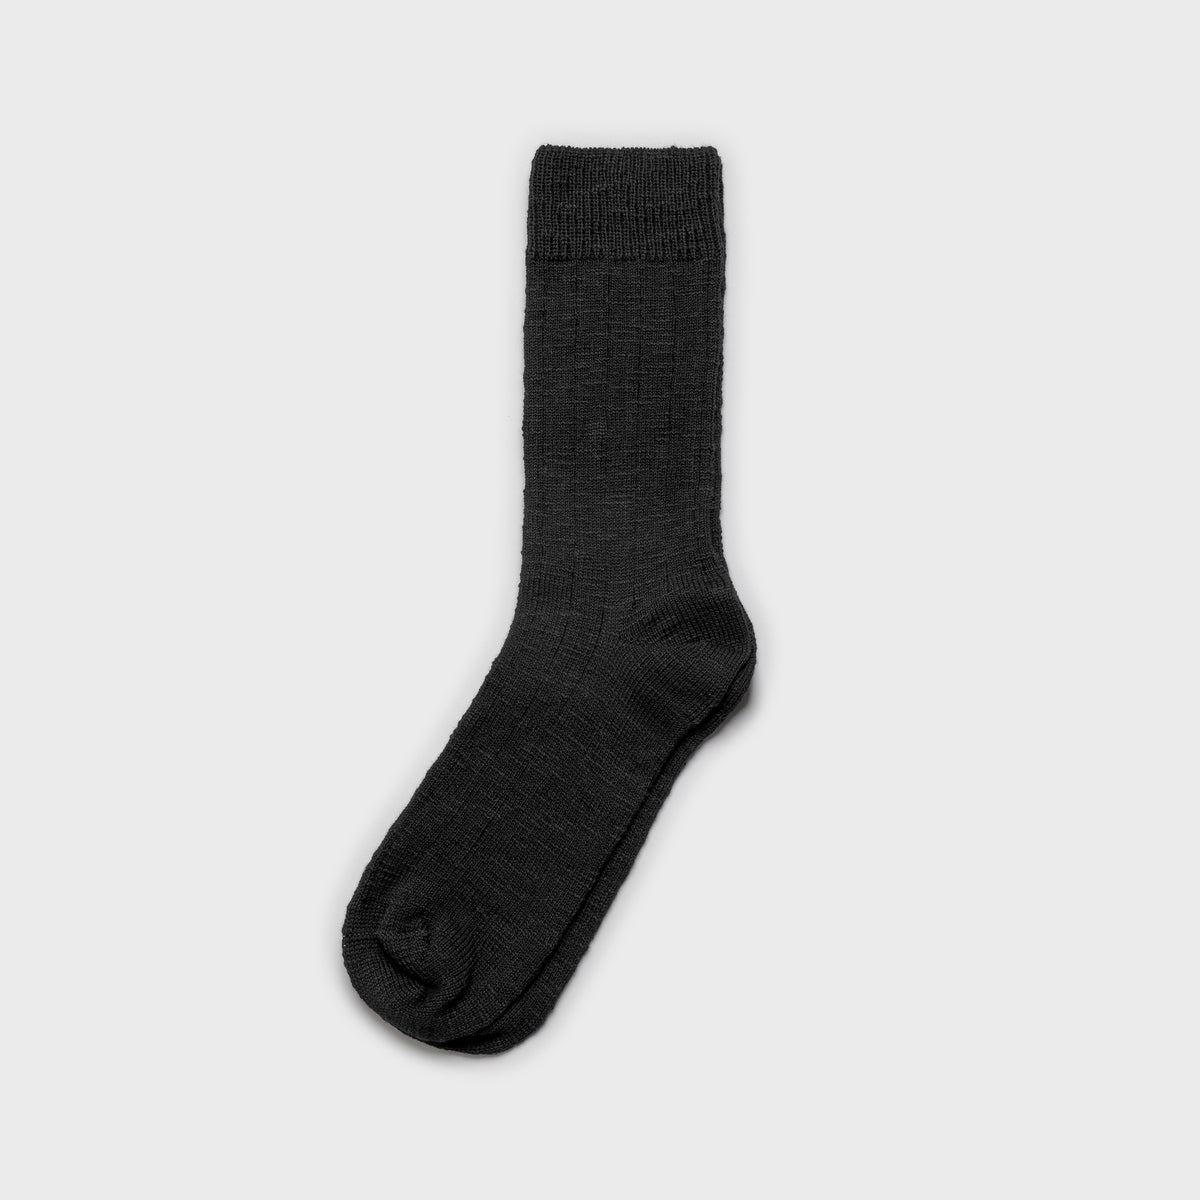 Flammé socks Black knitted in Portugal from a cotton blend - Front Women - Front Men